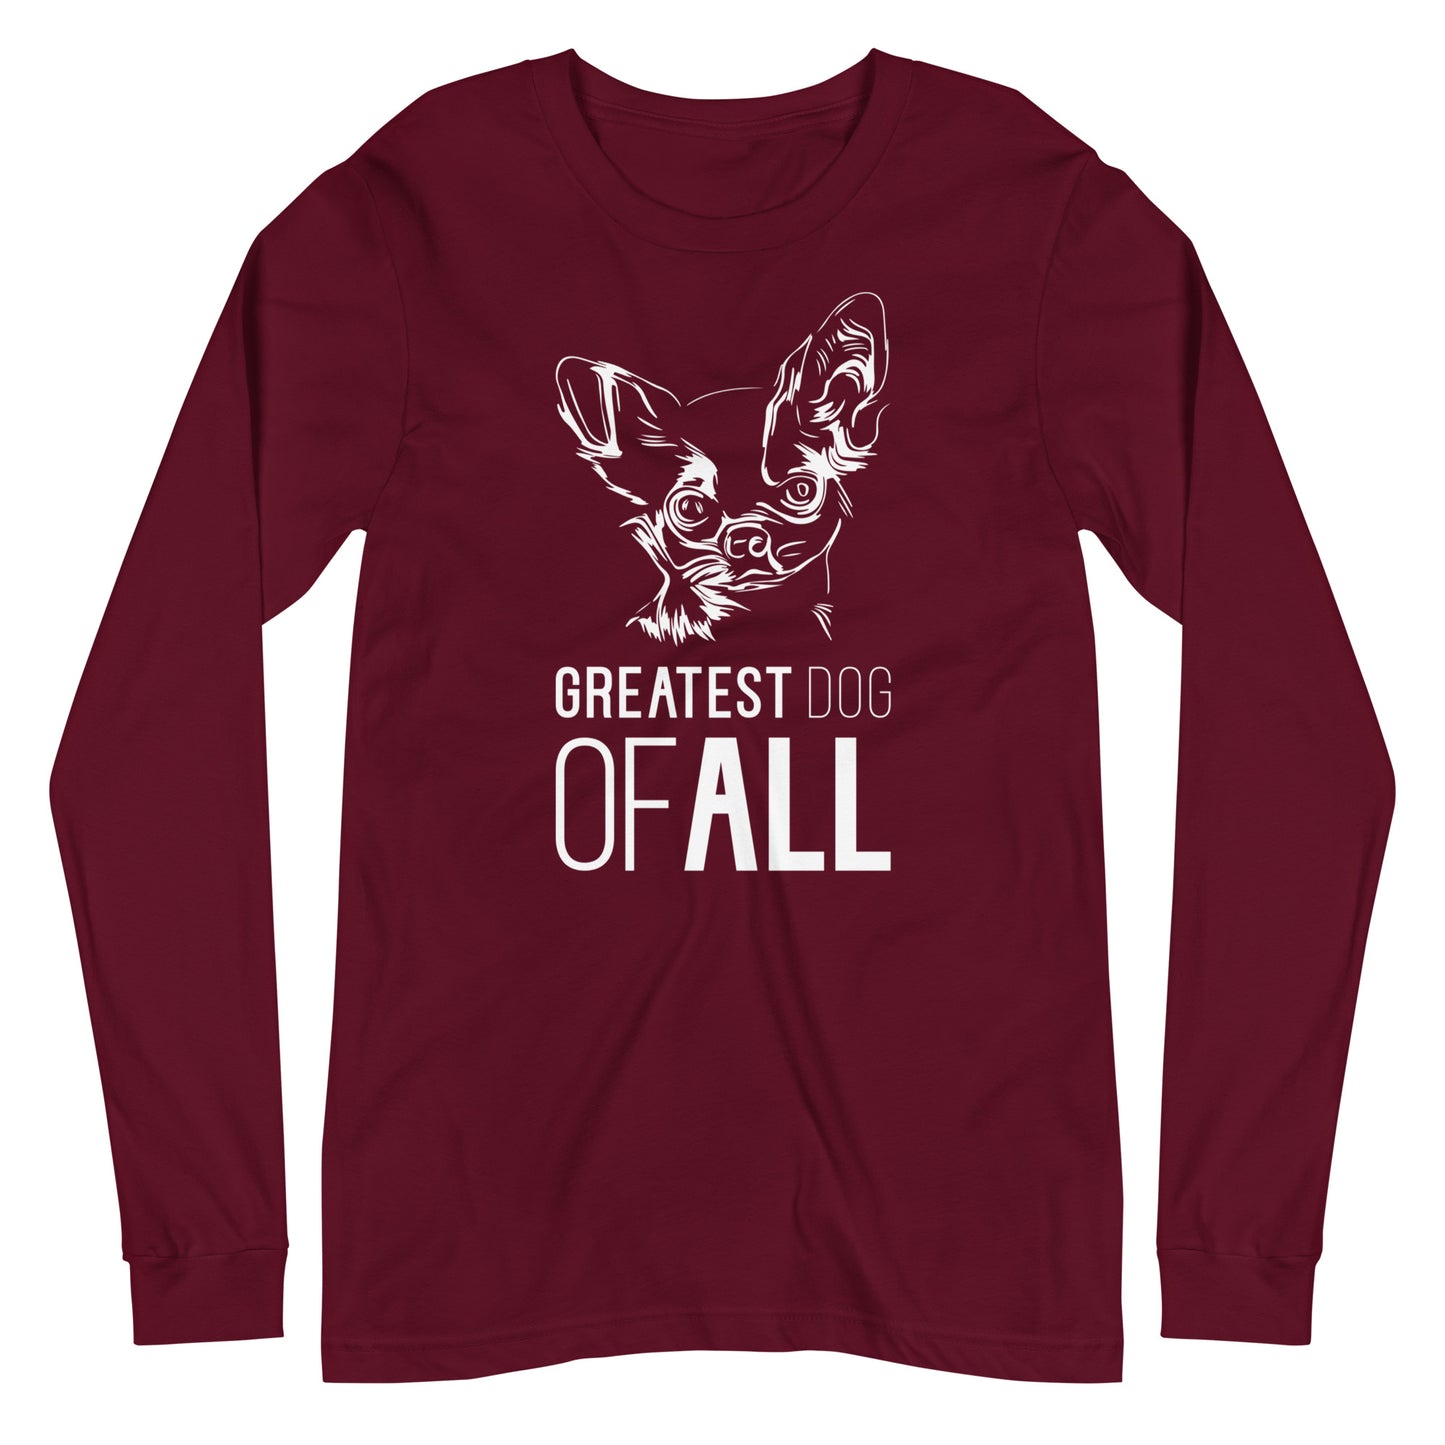 White line Chihuahua face with Greatest Dog of All caption on unisex maroon long sleeve t-shirt